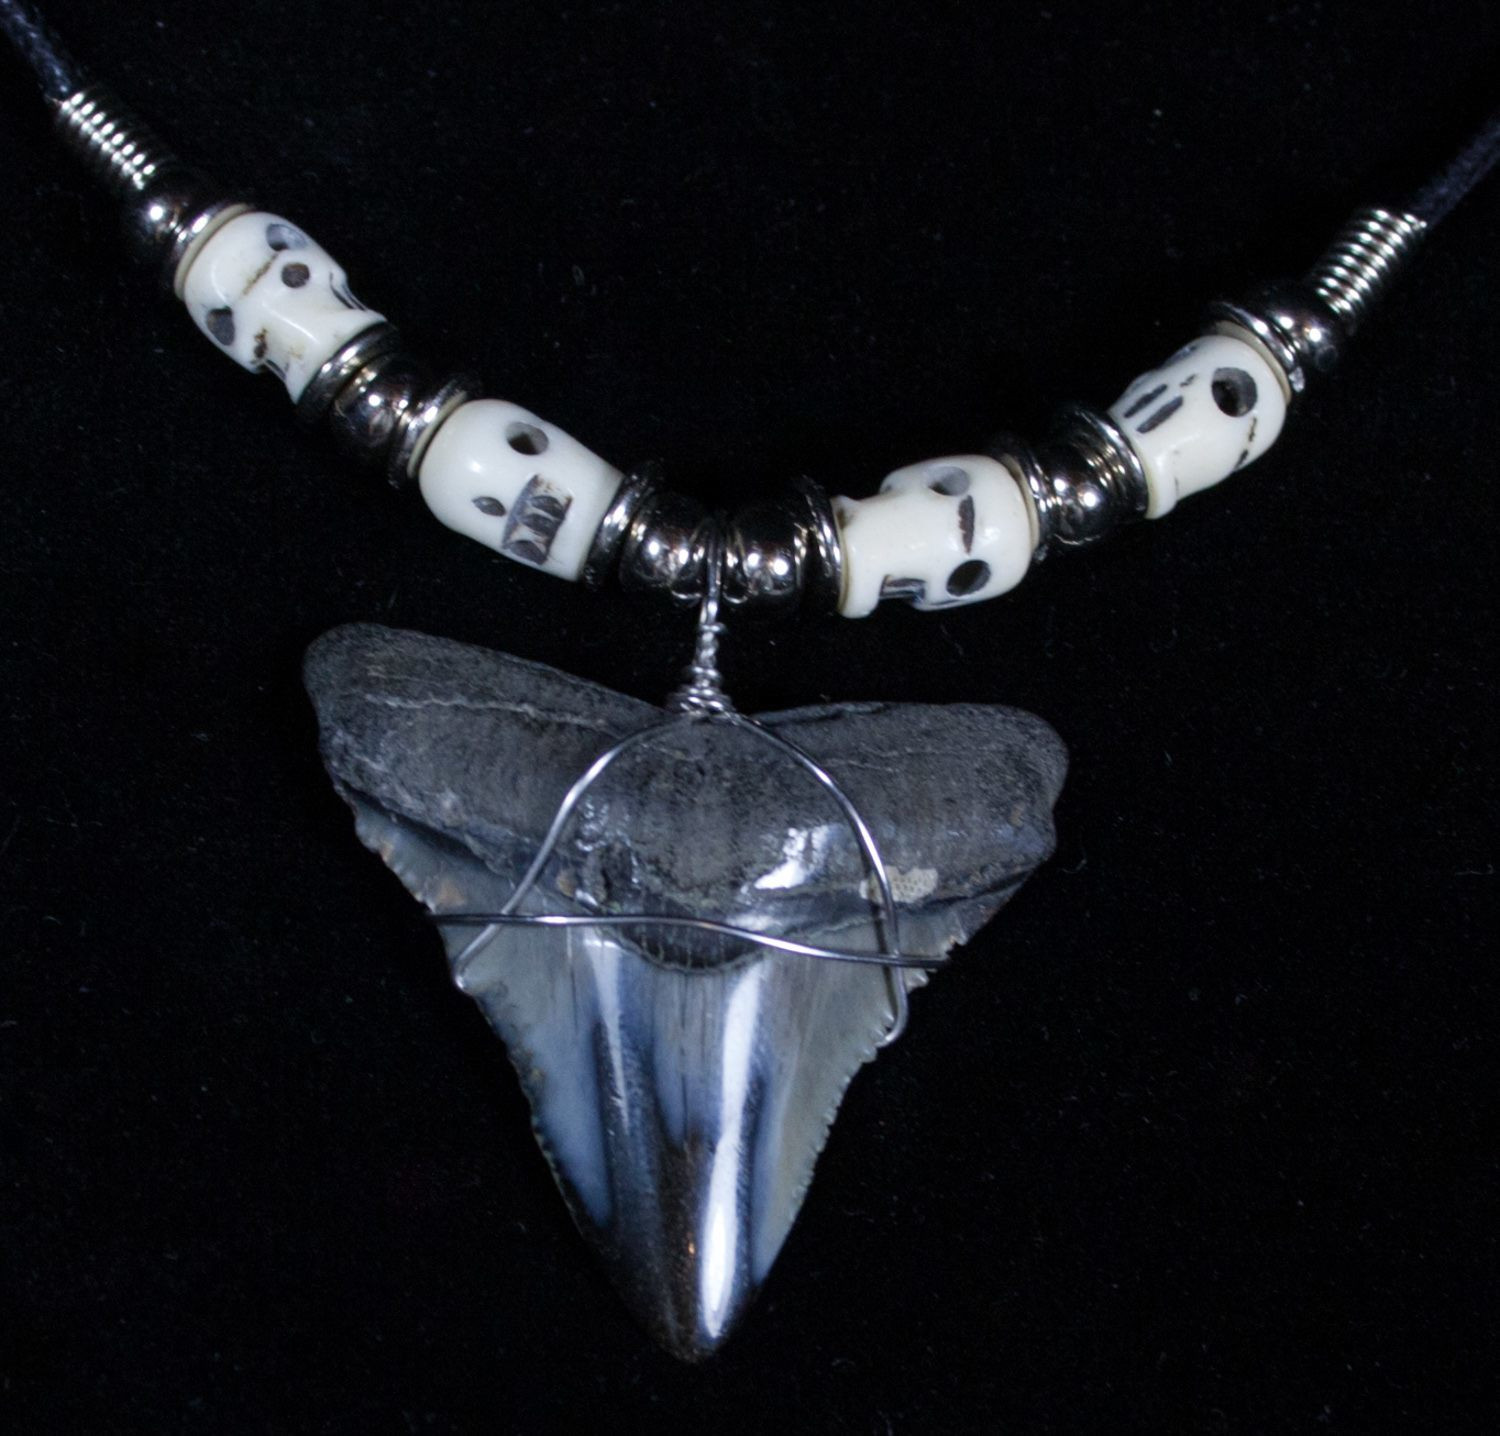 Megalodon Tooth Necklace
 Polished Megalodon Tooth Necklace For Sale 3379